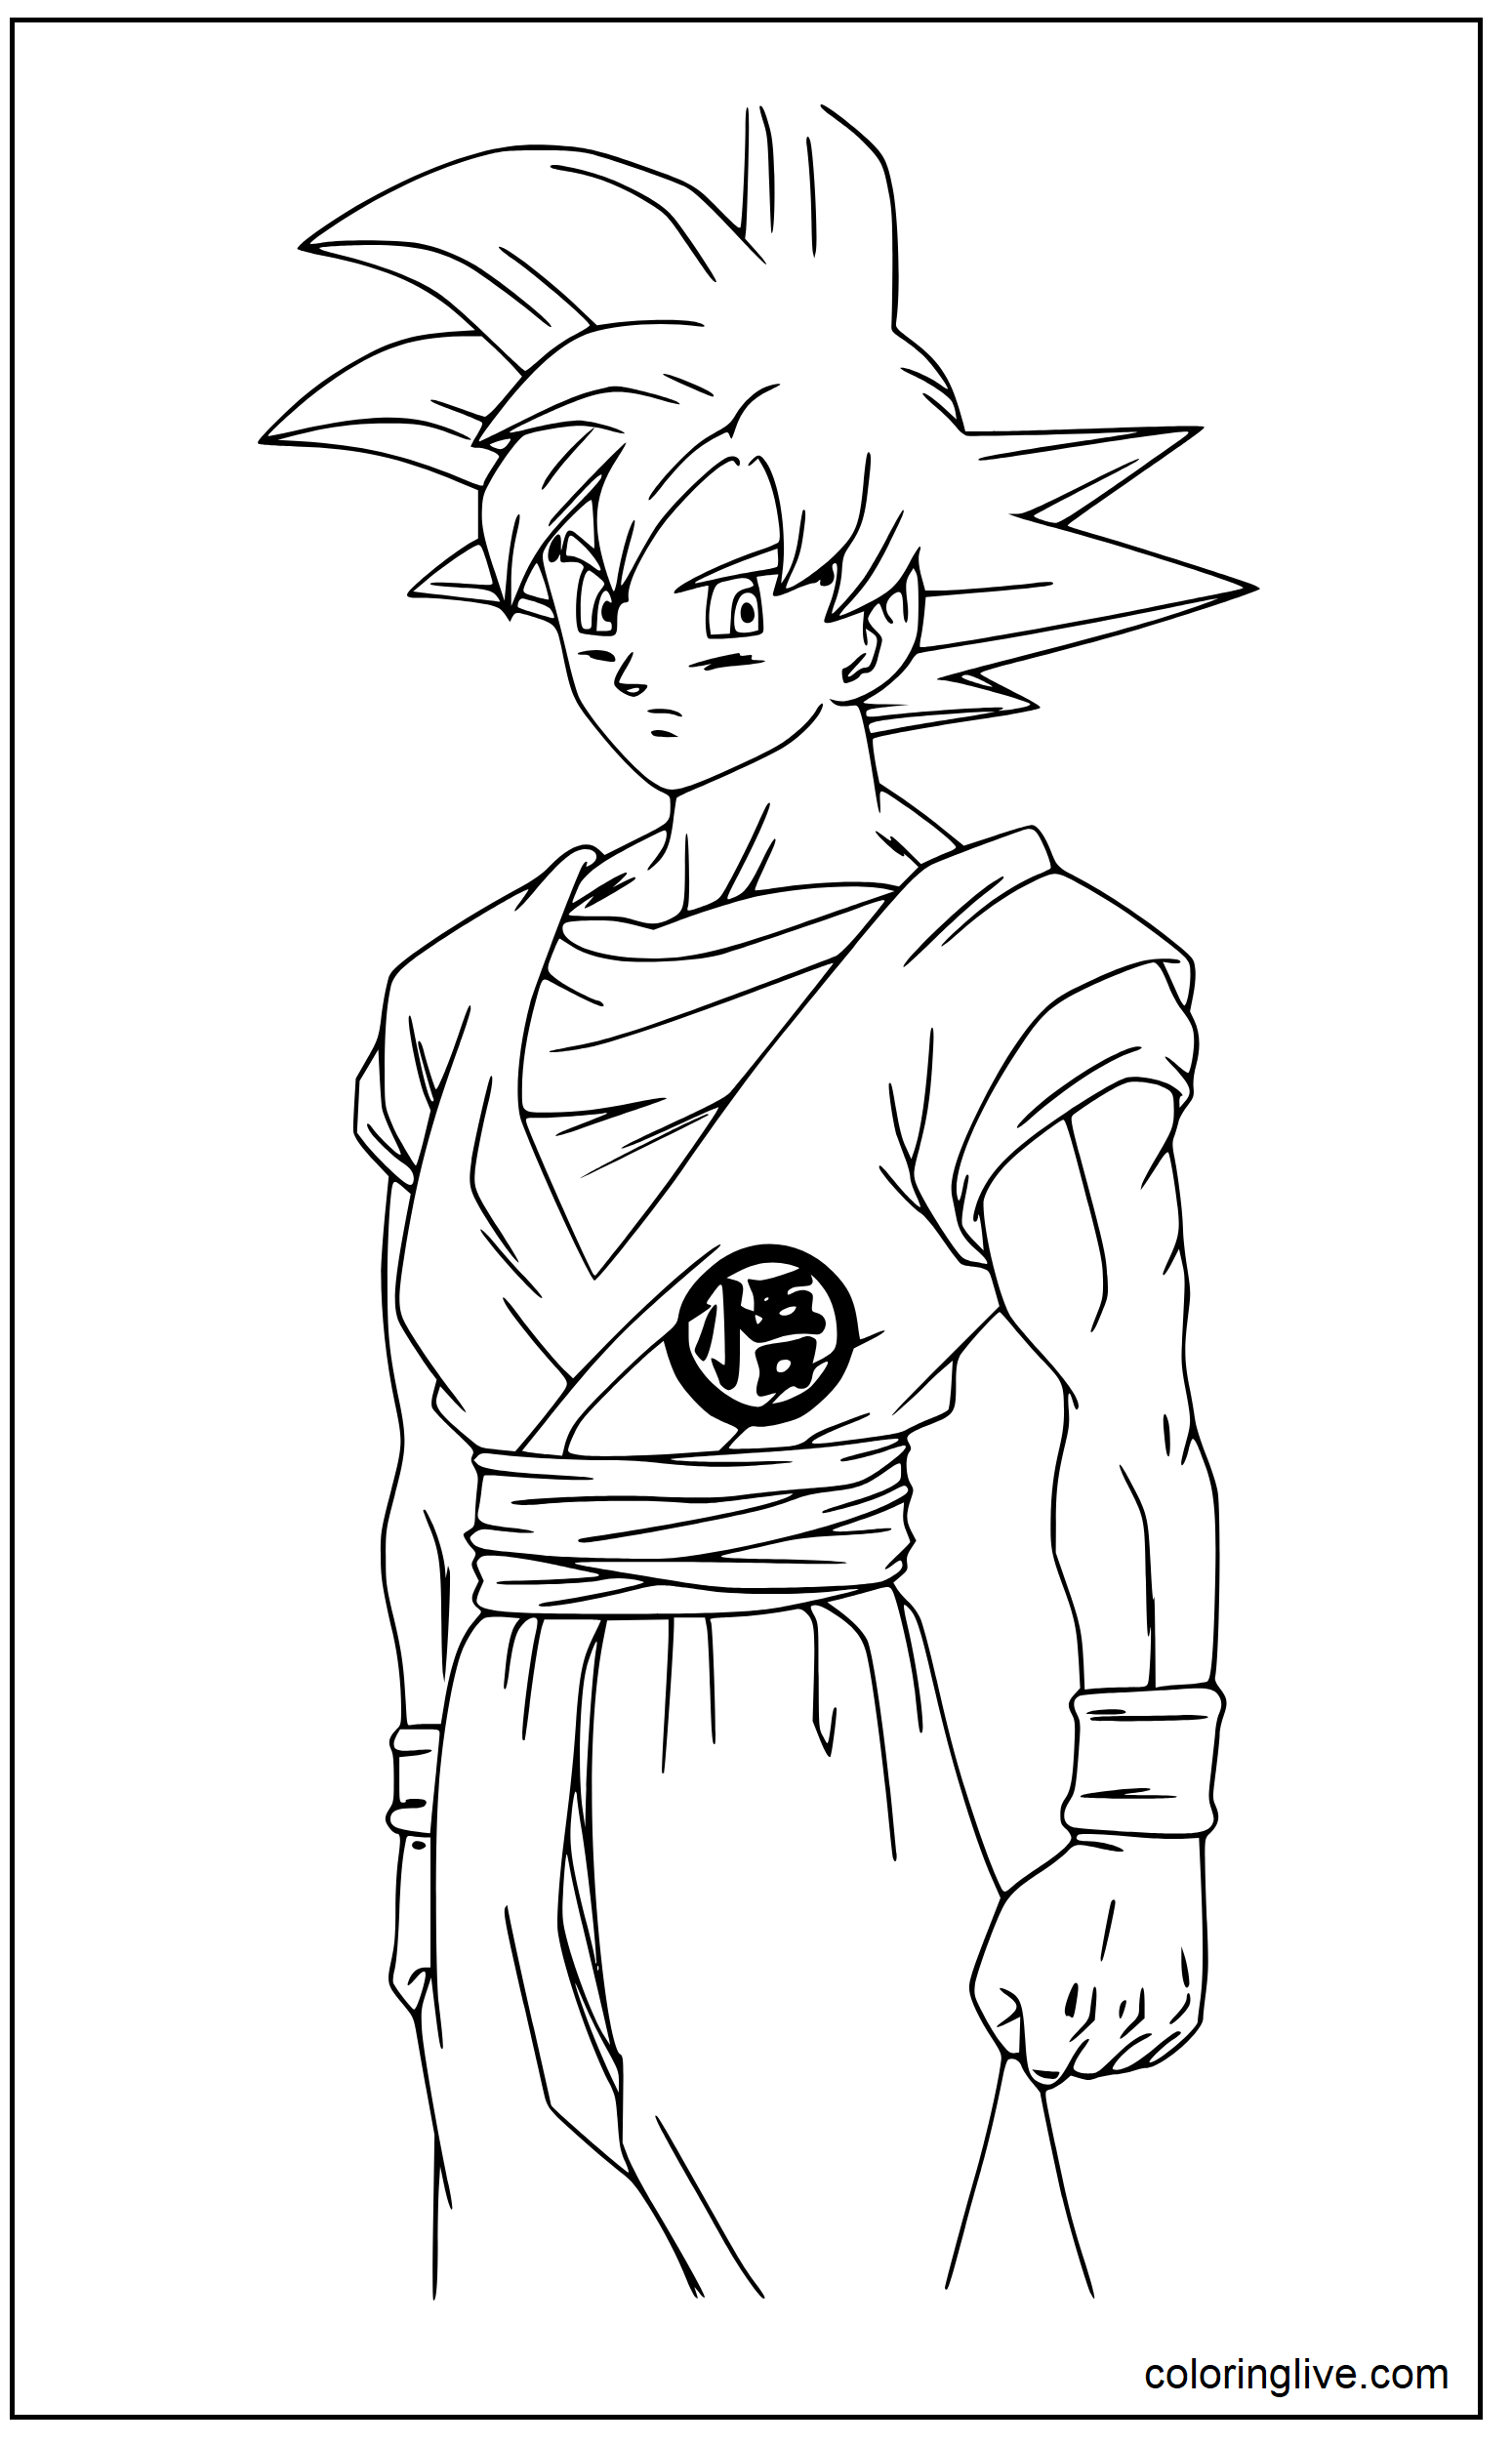 Printable Fighter Goku Coloring Page for kids.